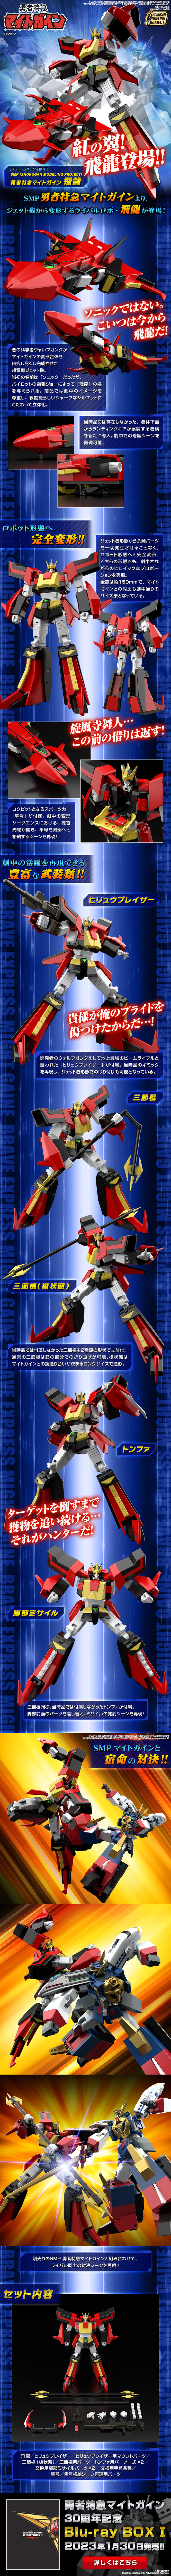 SMP [SHOKUGAN MODELING PROJECT] THE BRAVE EXPRESS MIGHT GAINE HIRYUU